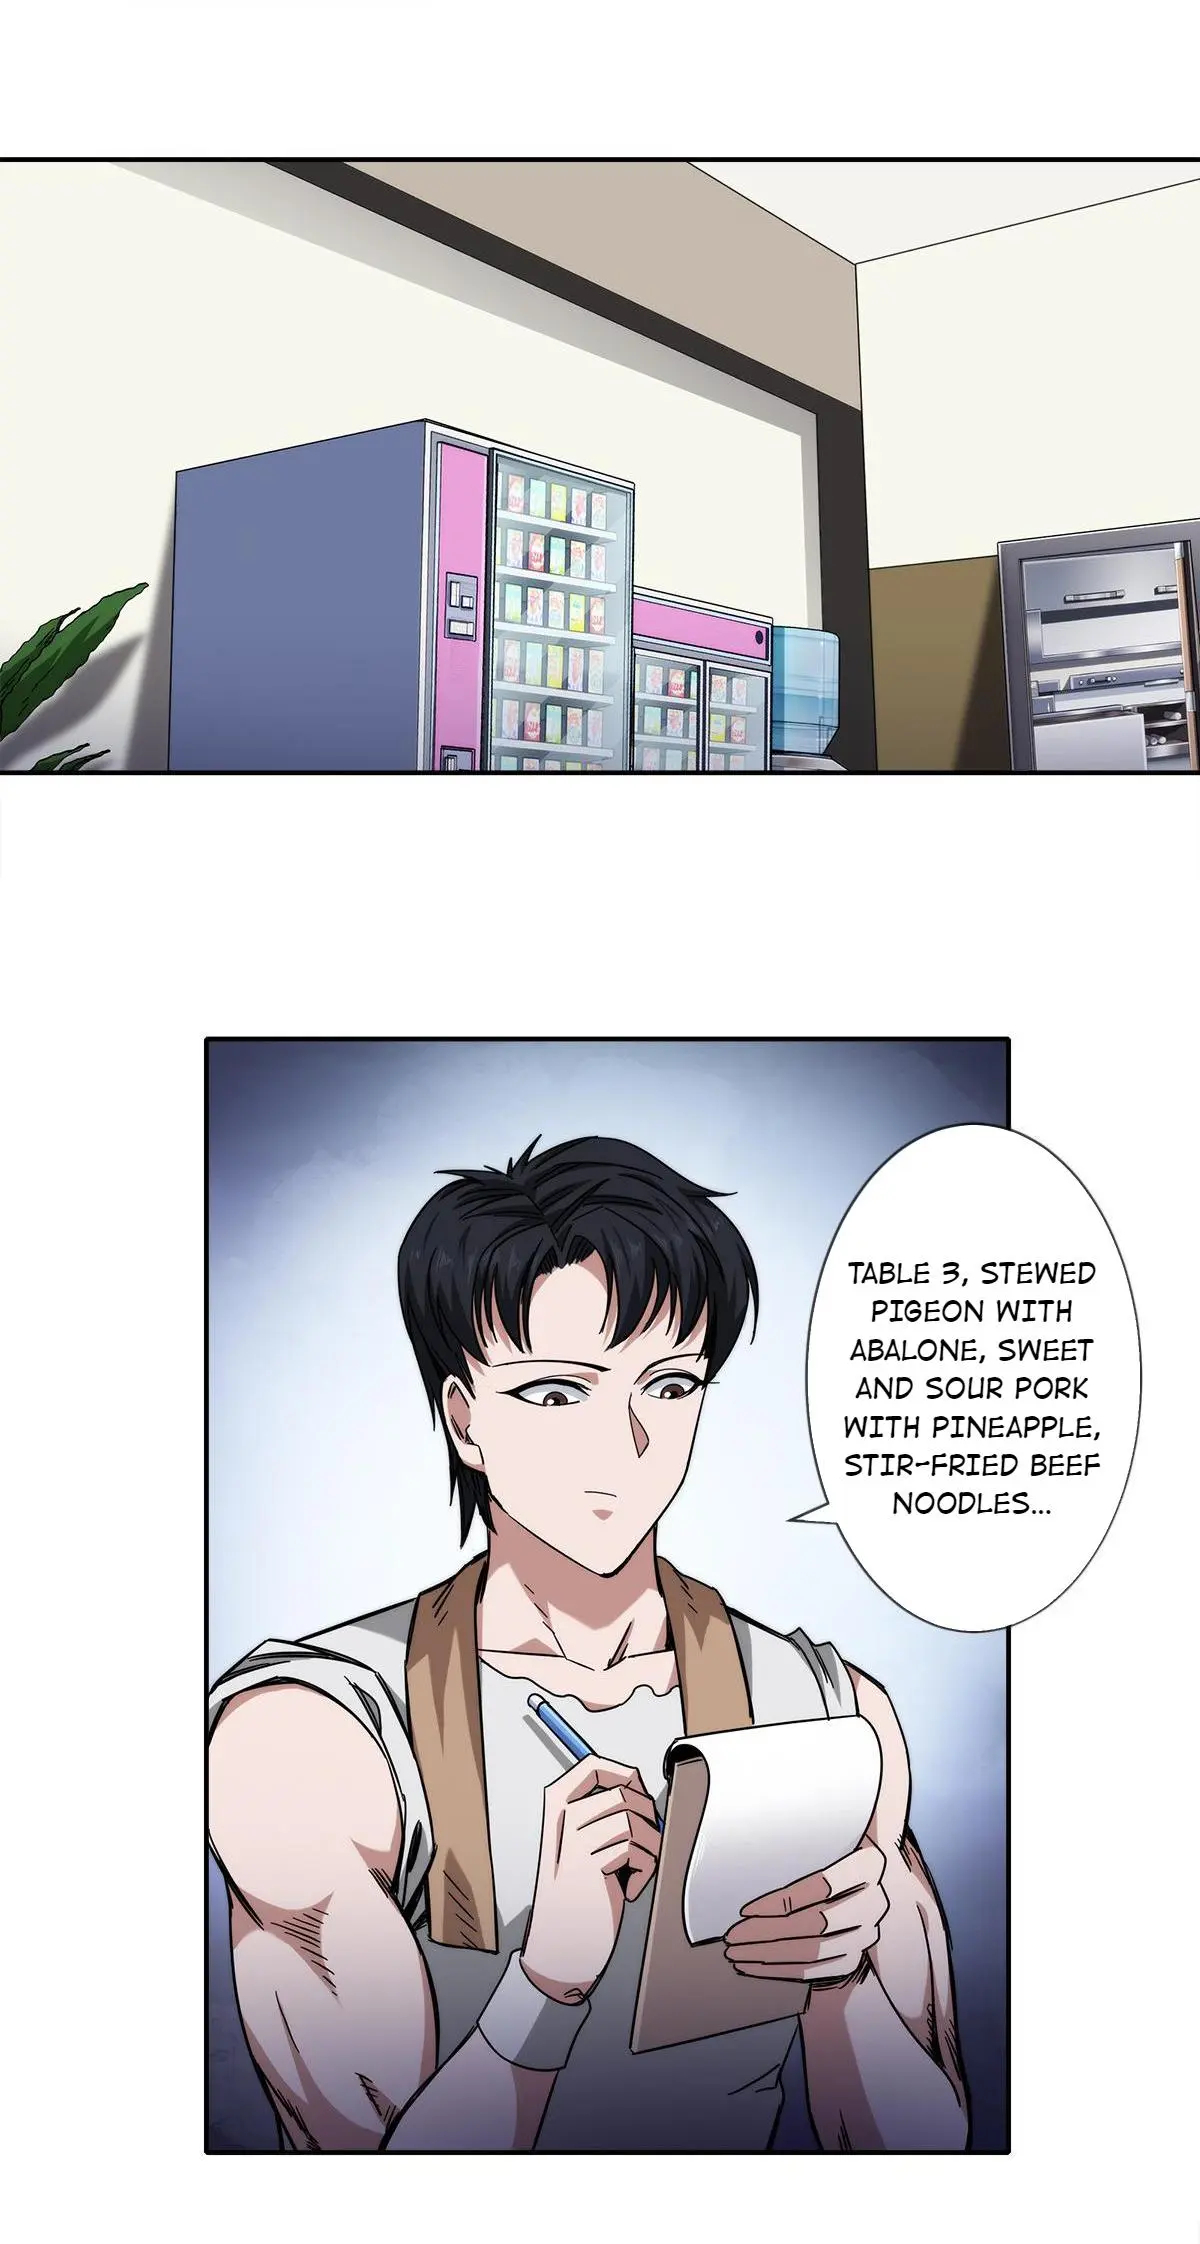 Handyman Saitou In Another World - Page 2